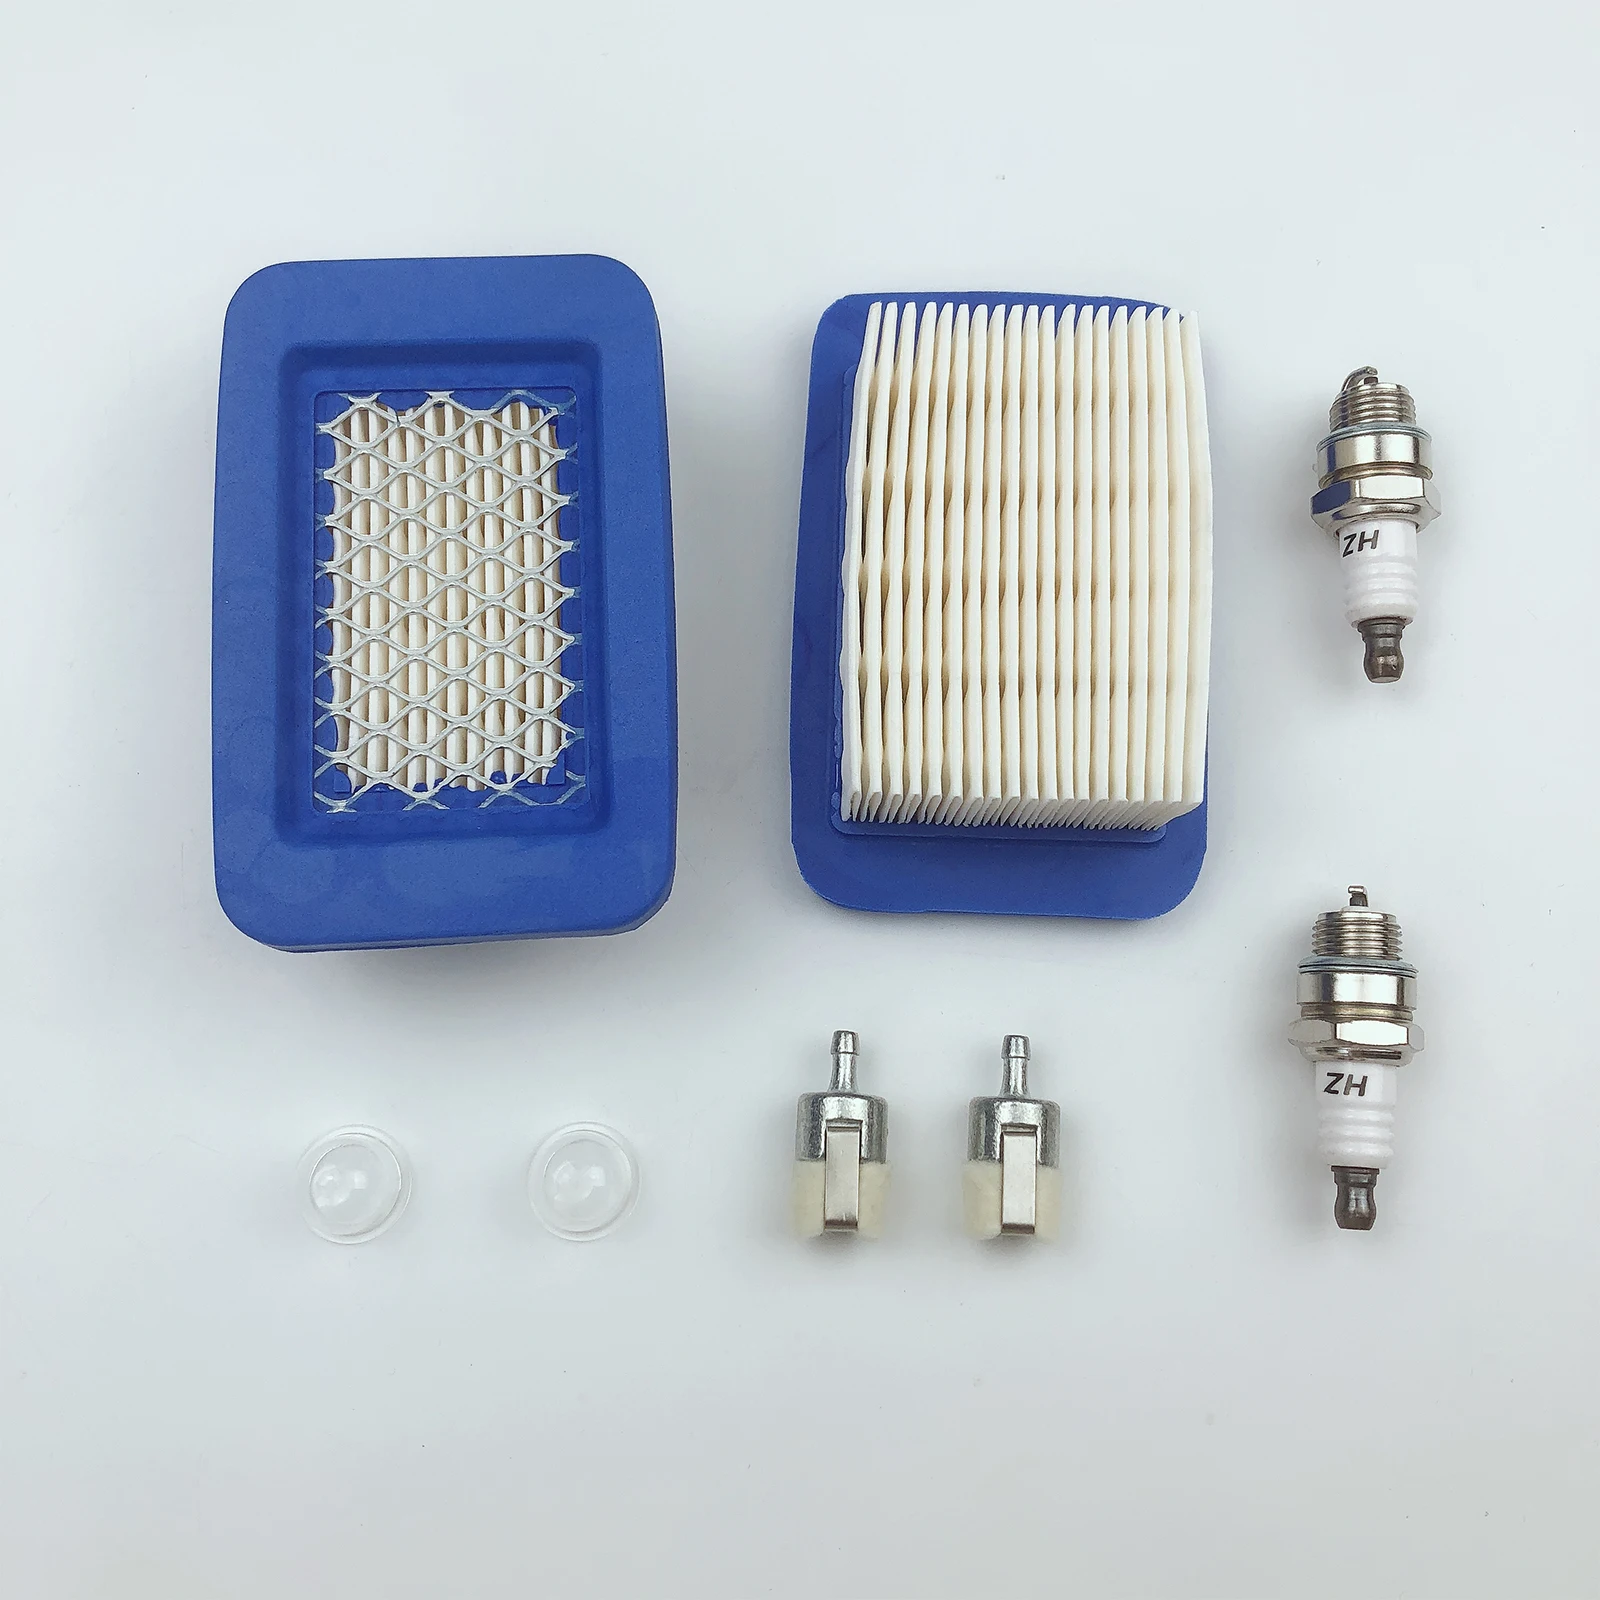 8 Pcs Air Filter Spark Plug Fuel Repower Tune-Up Kit for Echo Backpack Leaf Blower 2 Stroke Engine PB-403H PB-403T PB-413580T